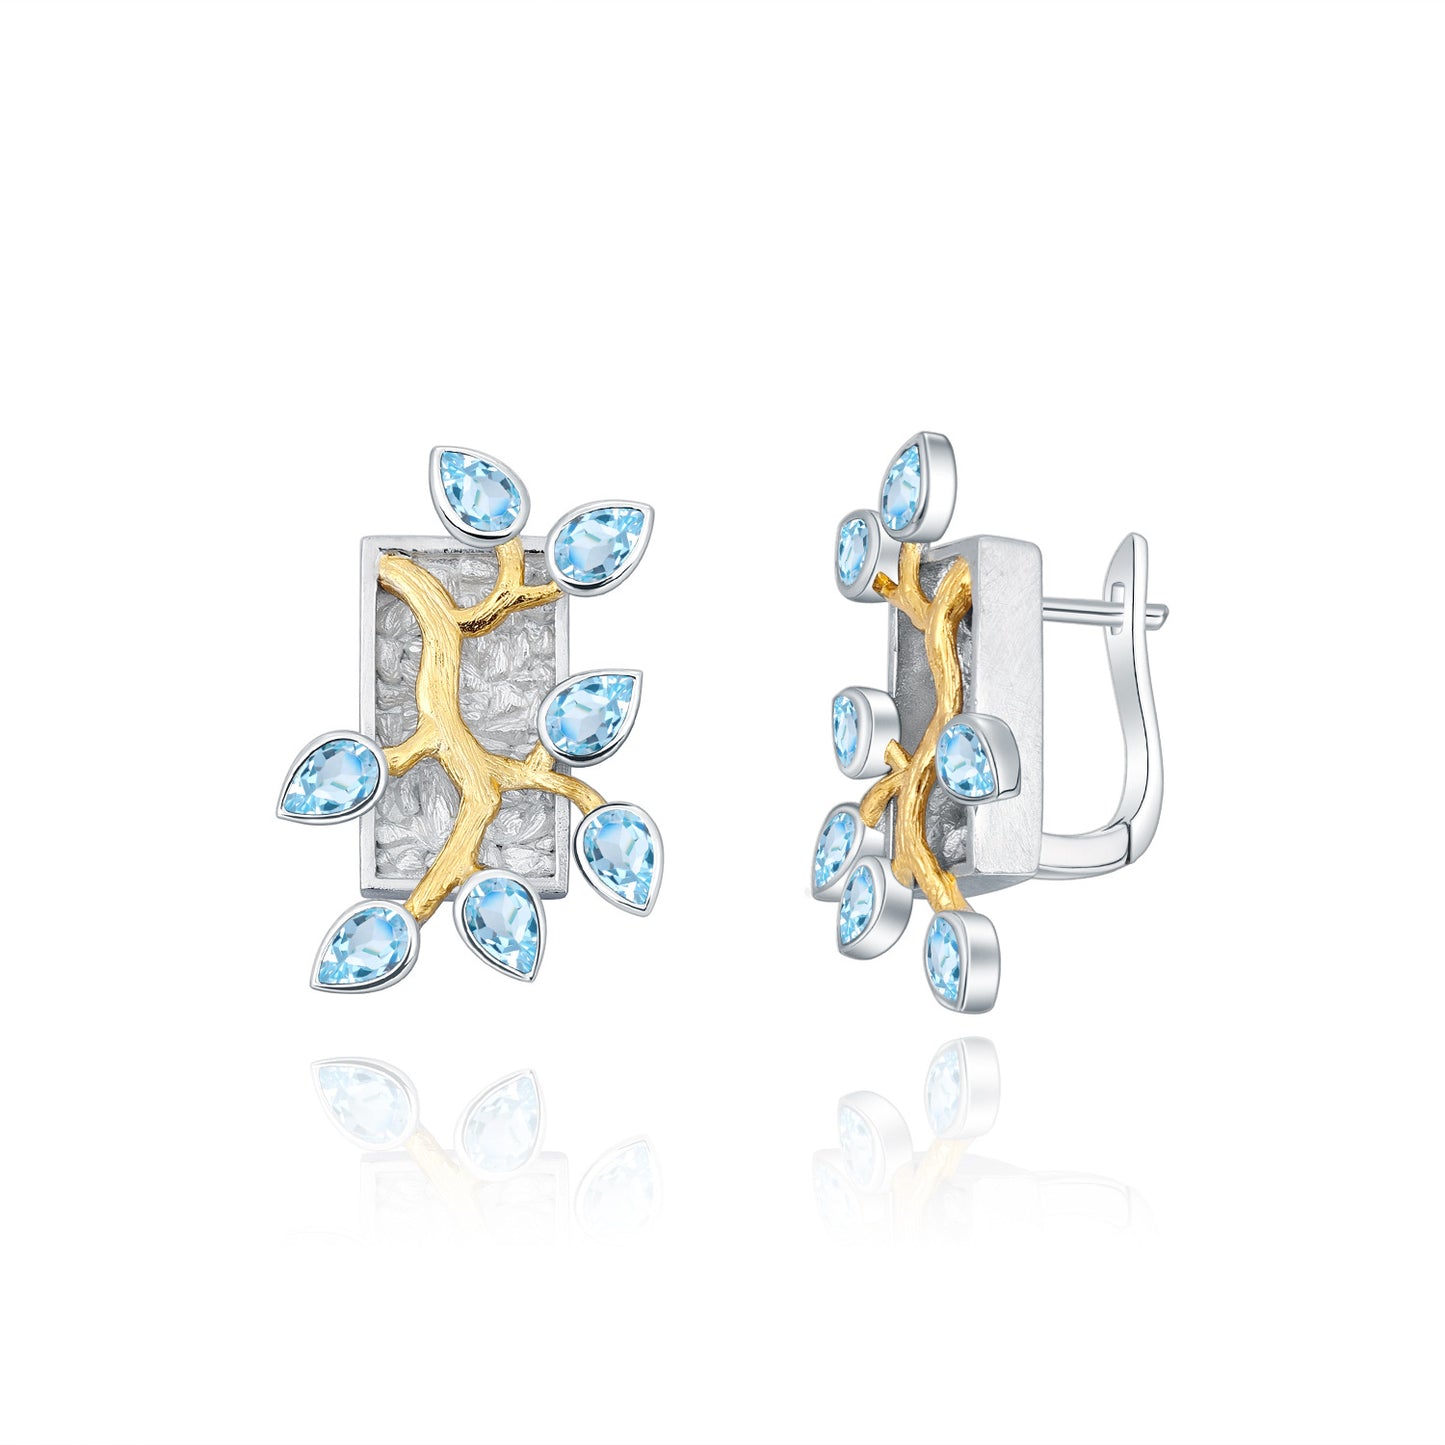 Natural Colourful Gemstones Flower and Branch Rectangle Silver Studs Earrings for Women